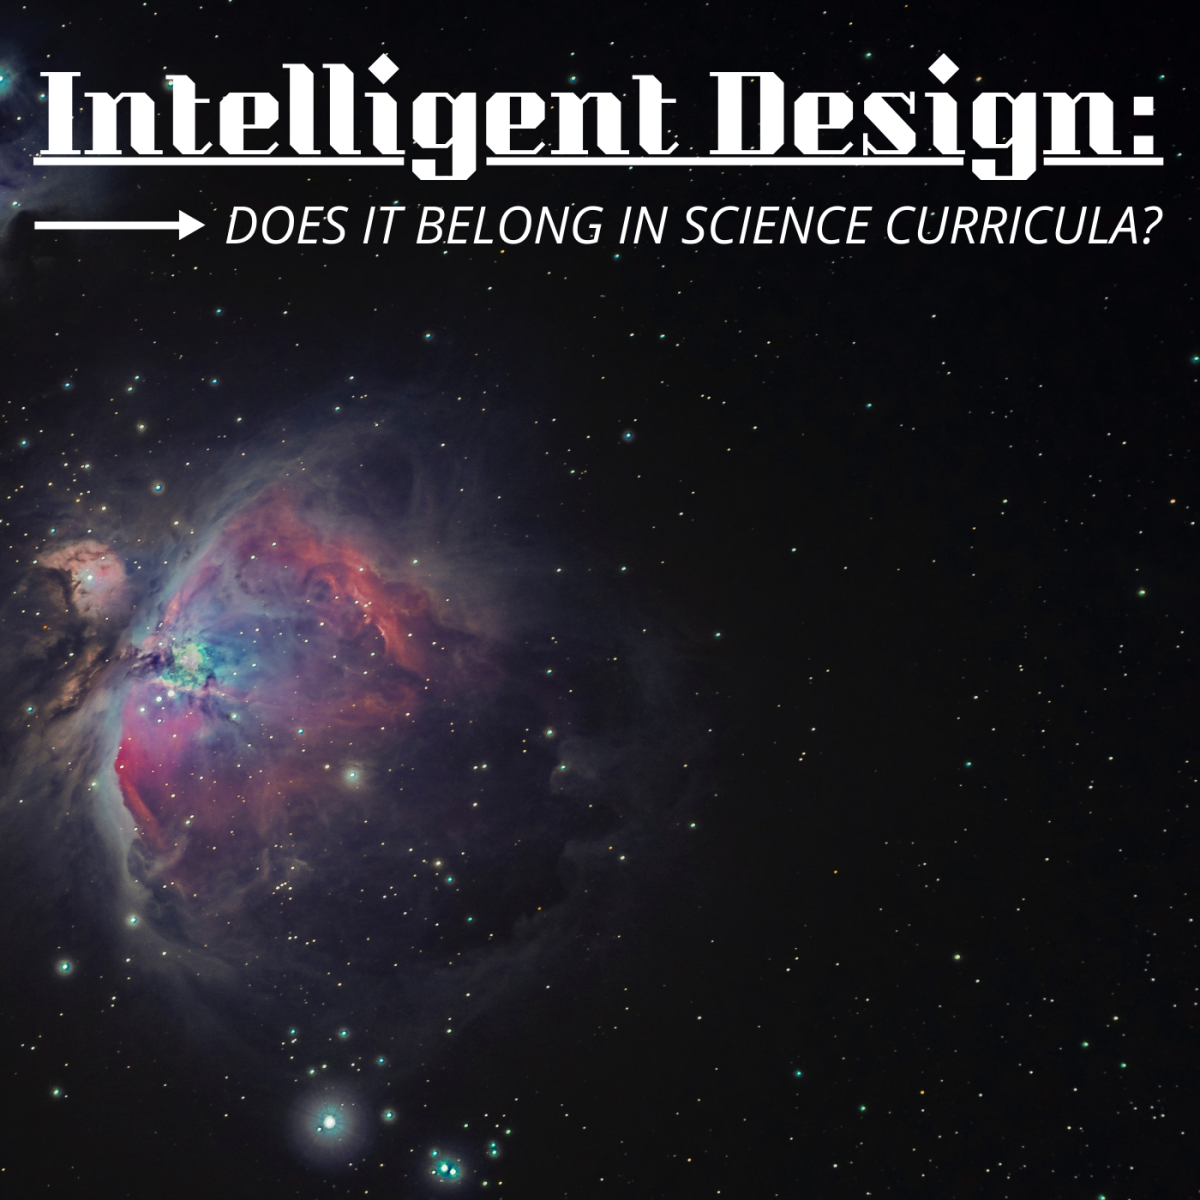 Does Intelligent Design Have Any Place in Science Classrooms?